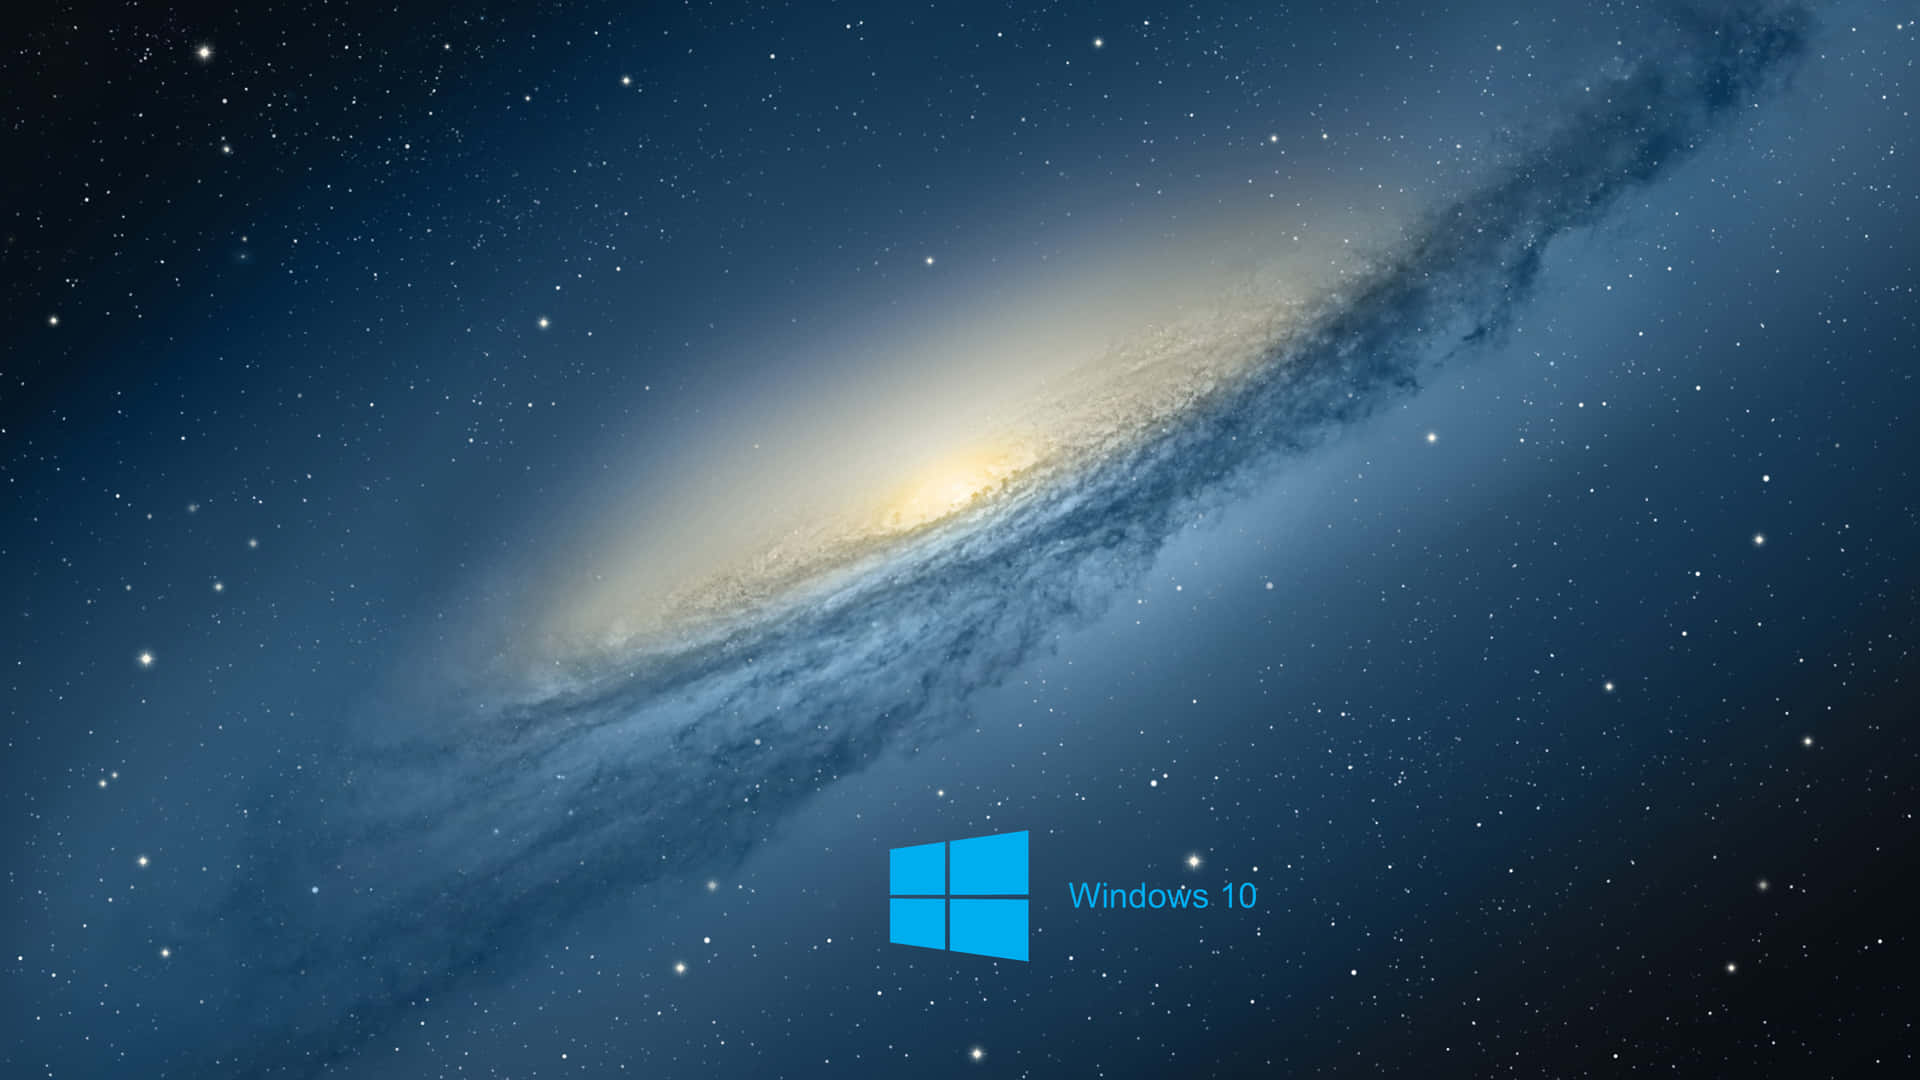 Experience the power of Windows 10.